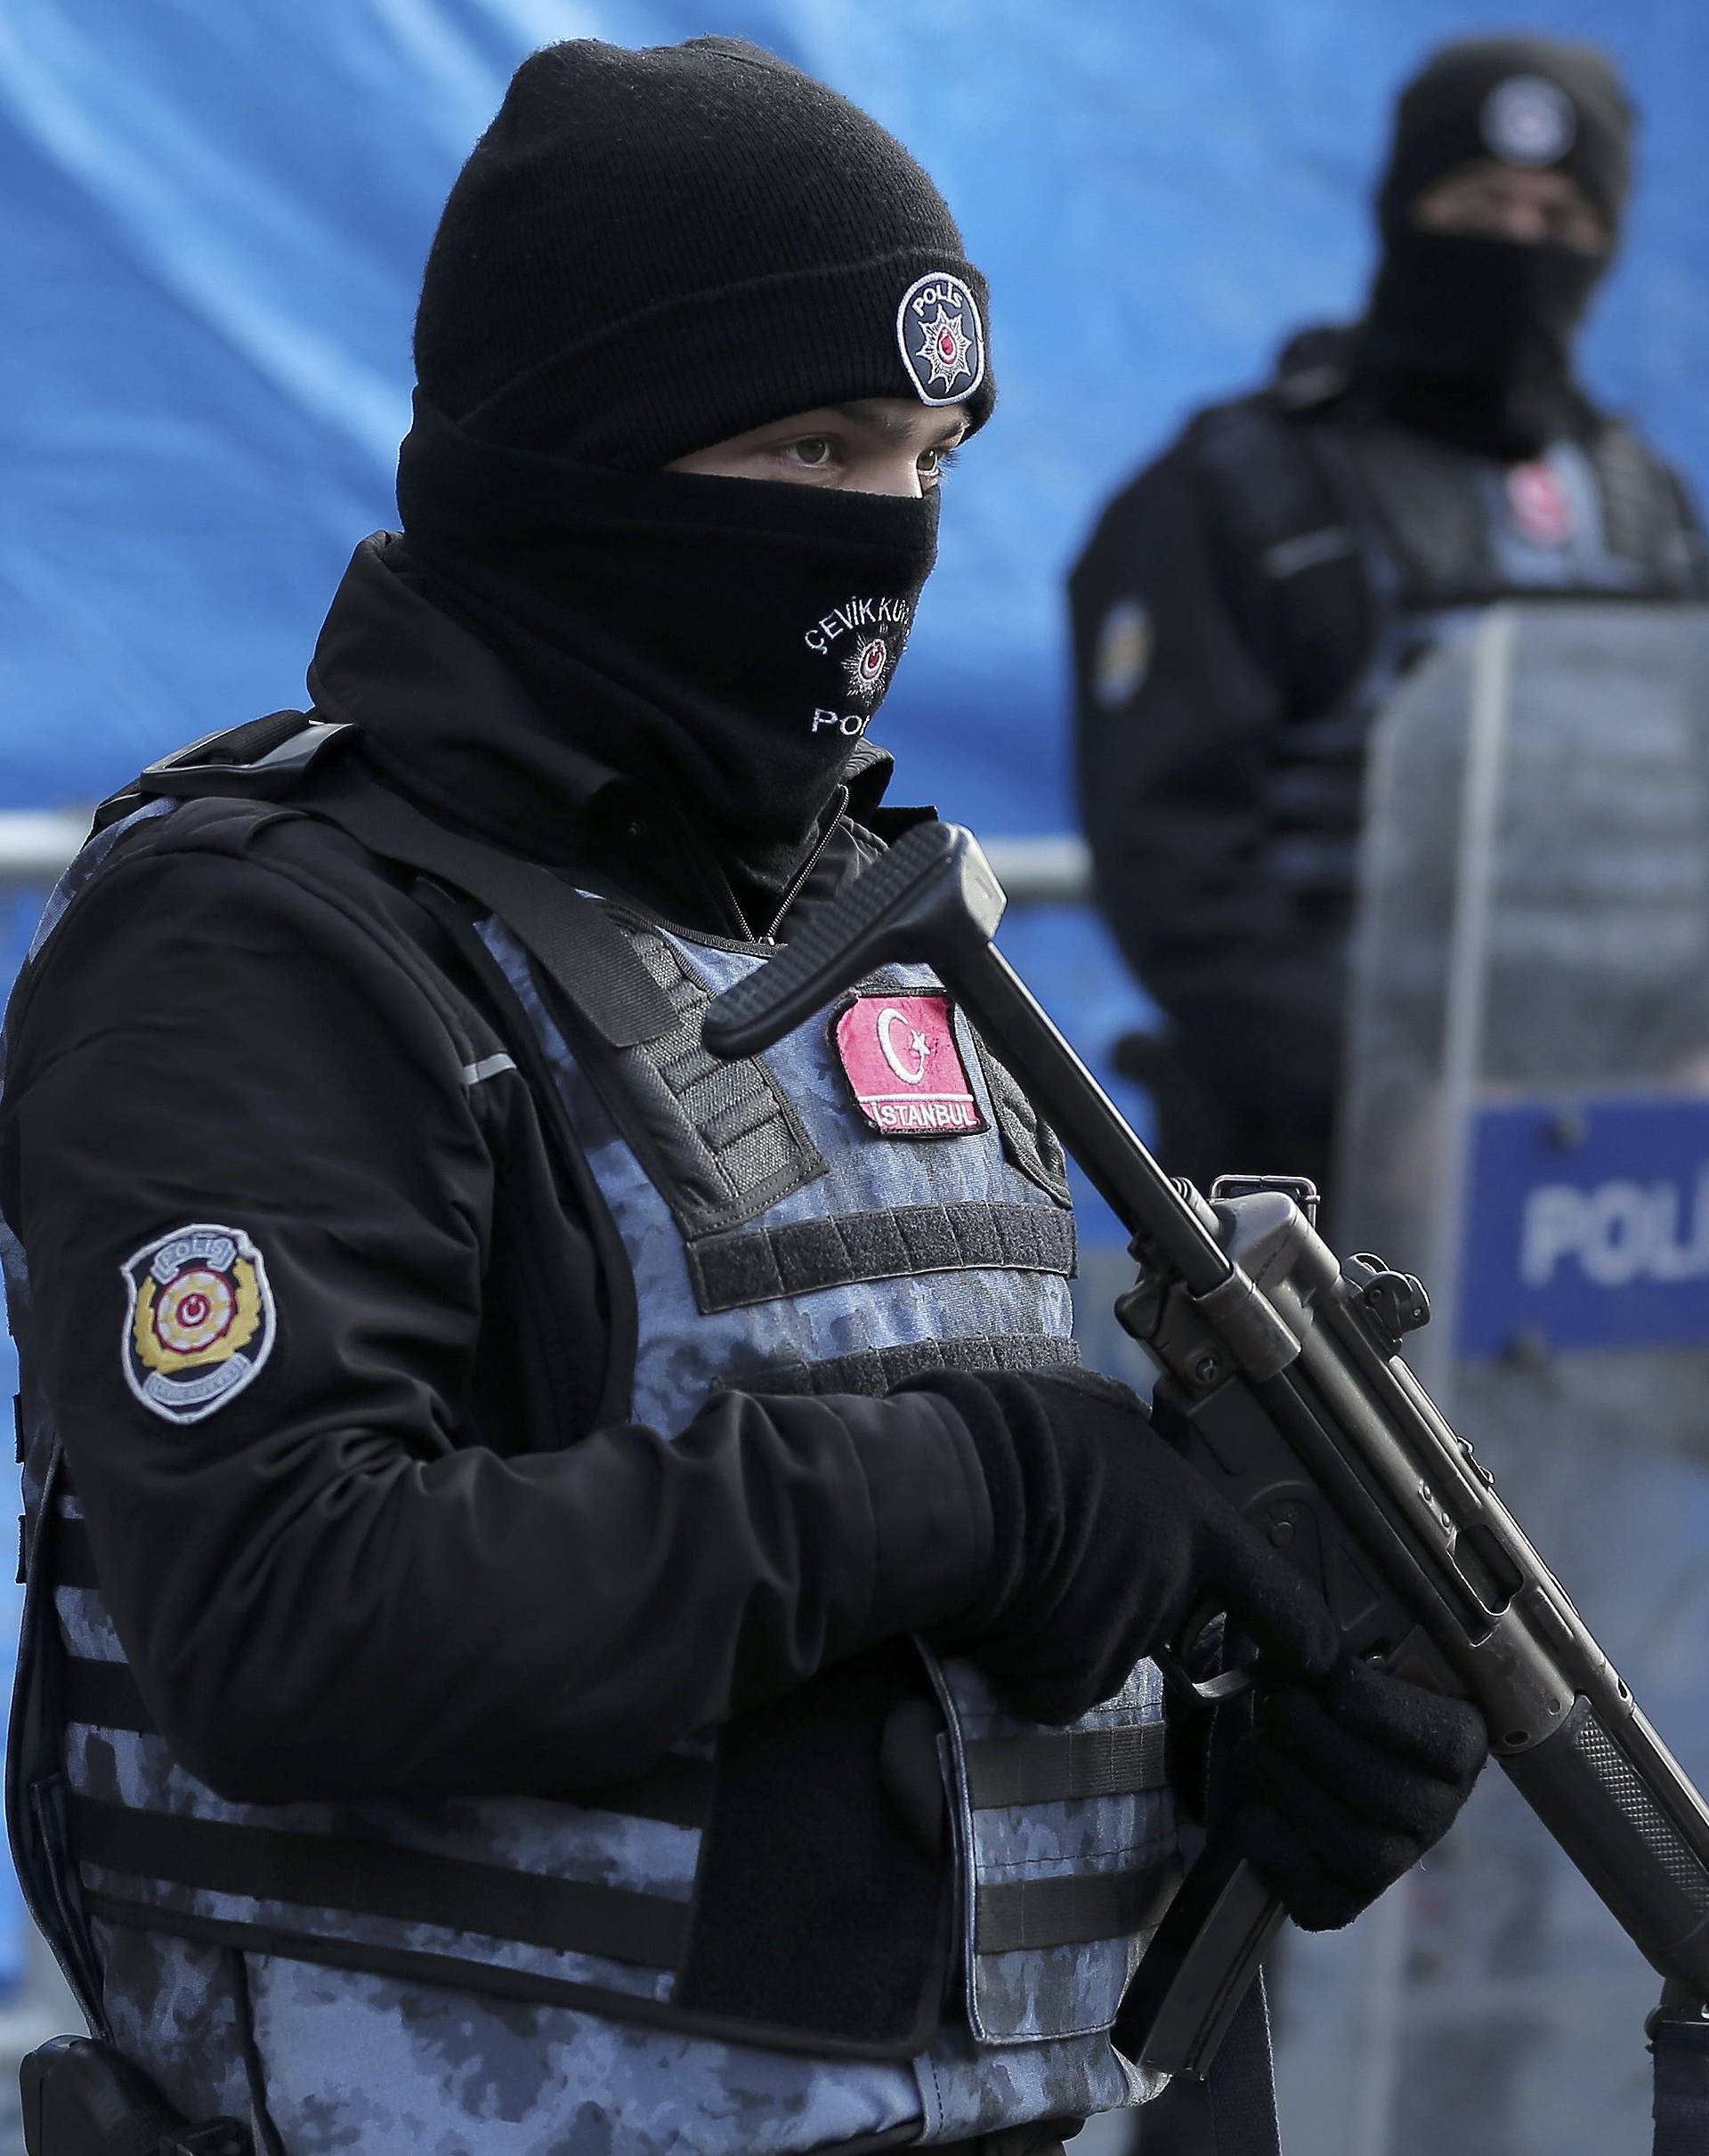 Turkish police stand guard outisde the Reina nightclub by the Bosphorus, which was attacked by a gunman, in Istanbul